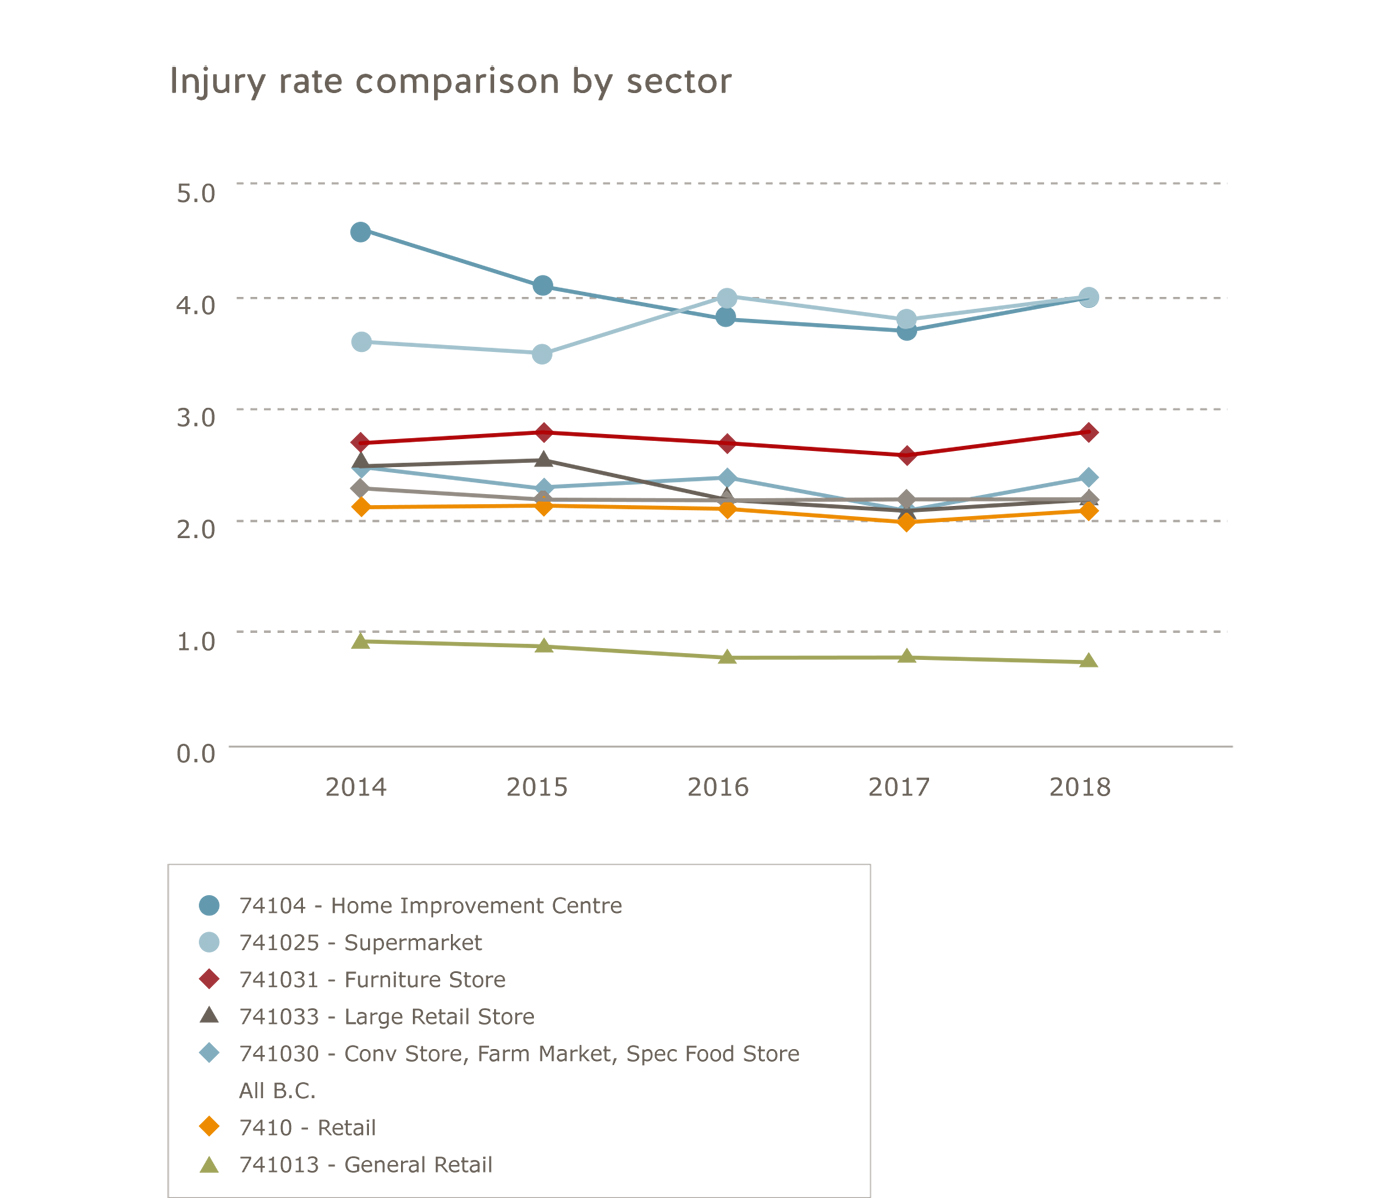 Retail industry injury rate comparison by sector for 2014 to 2018